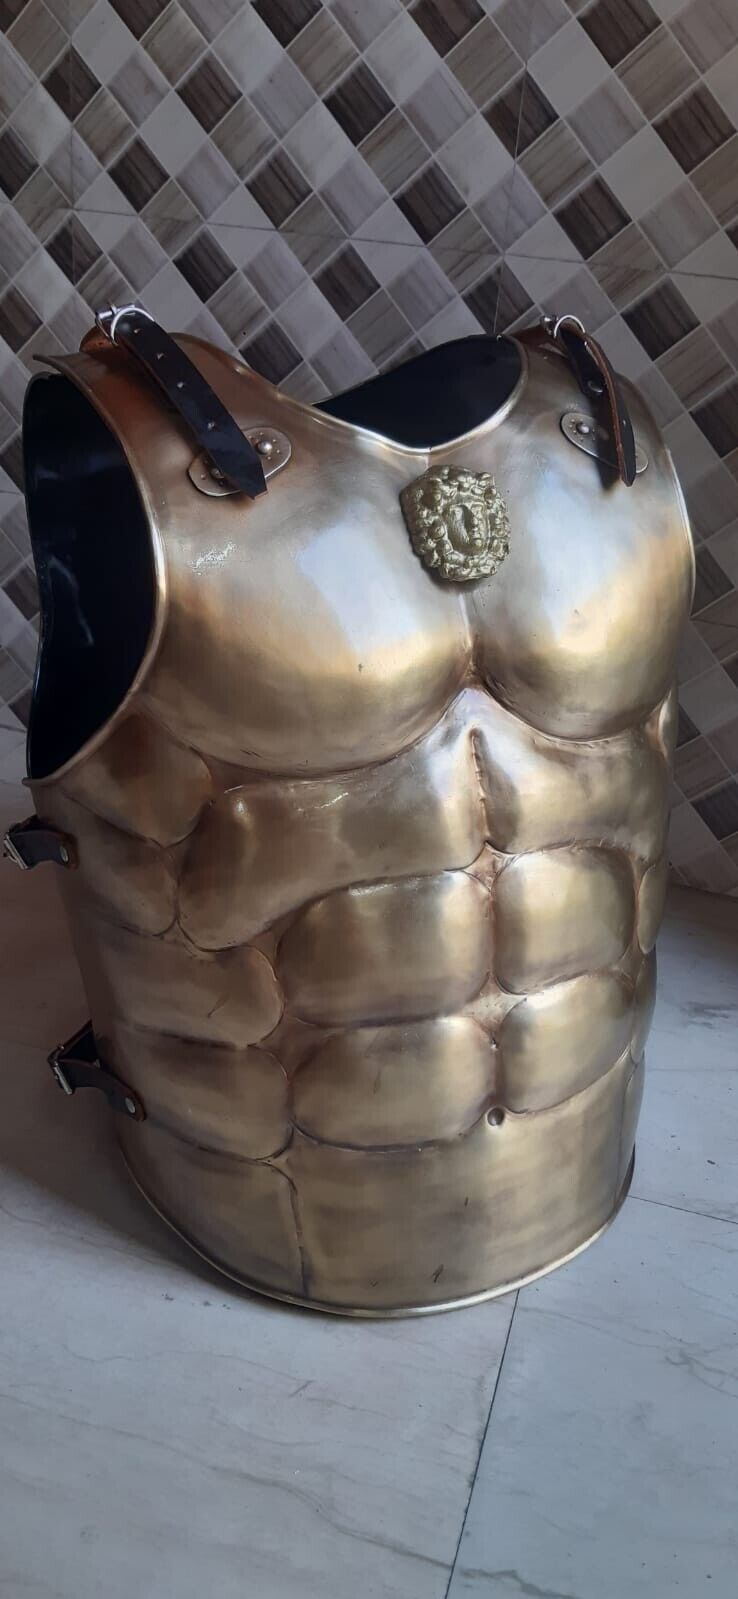 New Medieval Roman Muscle Armour Jacket Reenactment Costume Replica Item